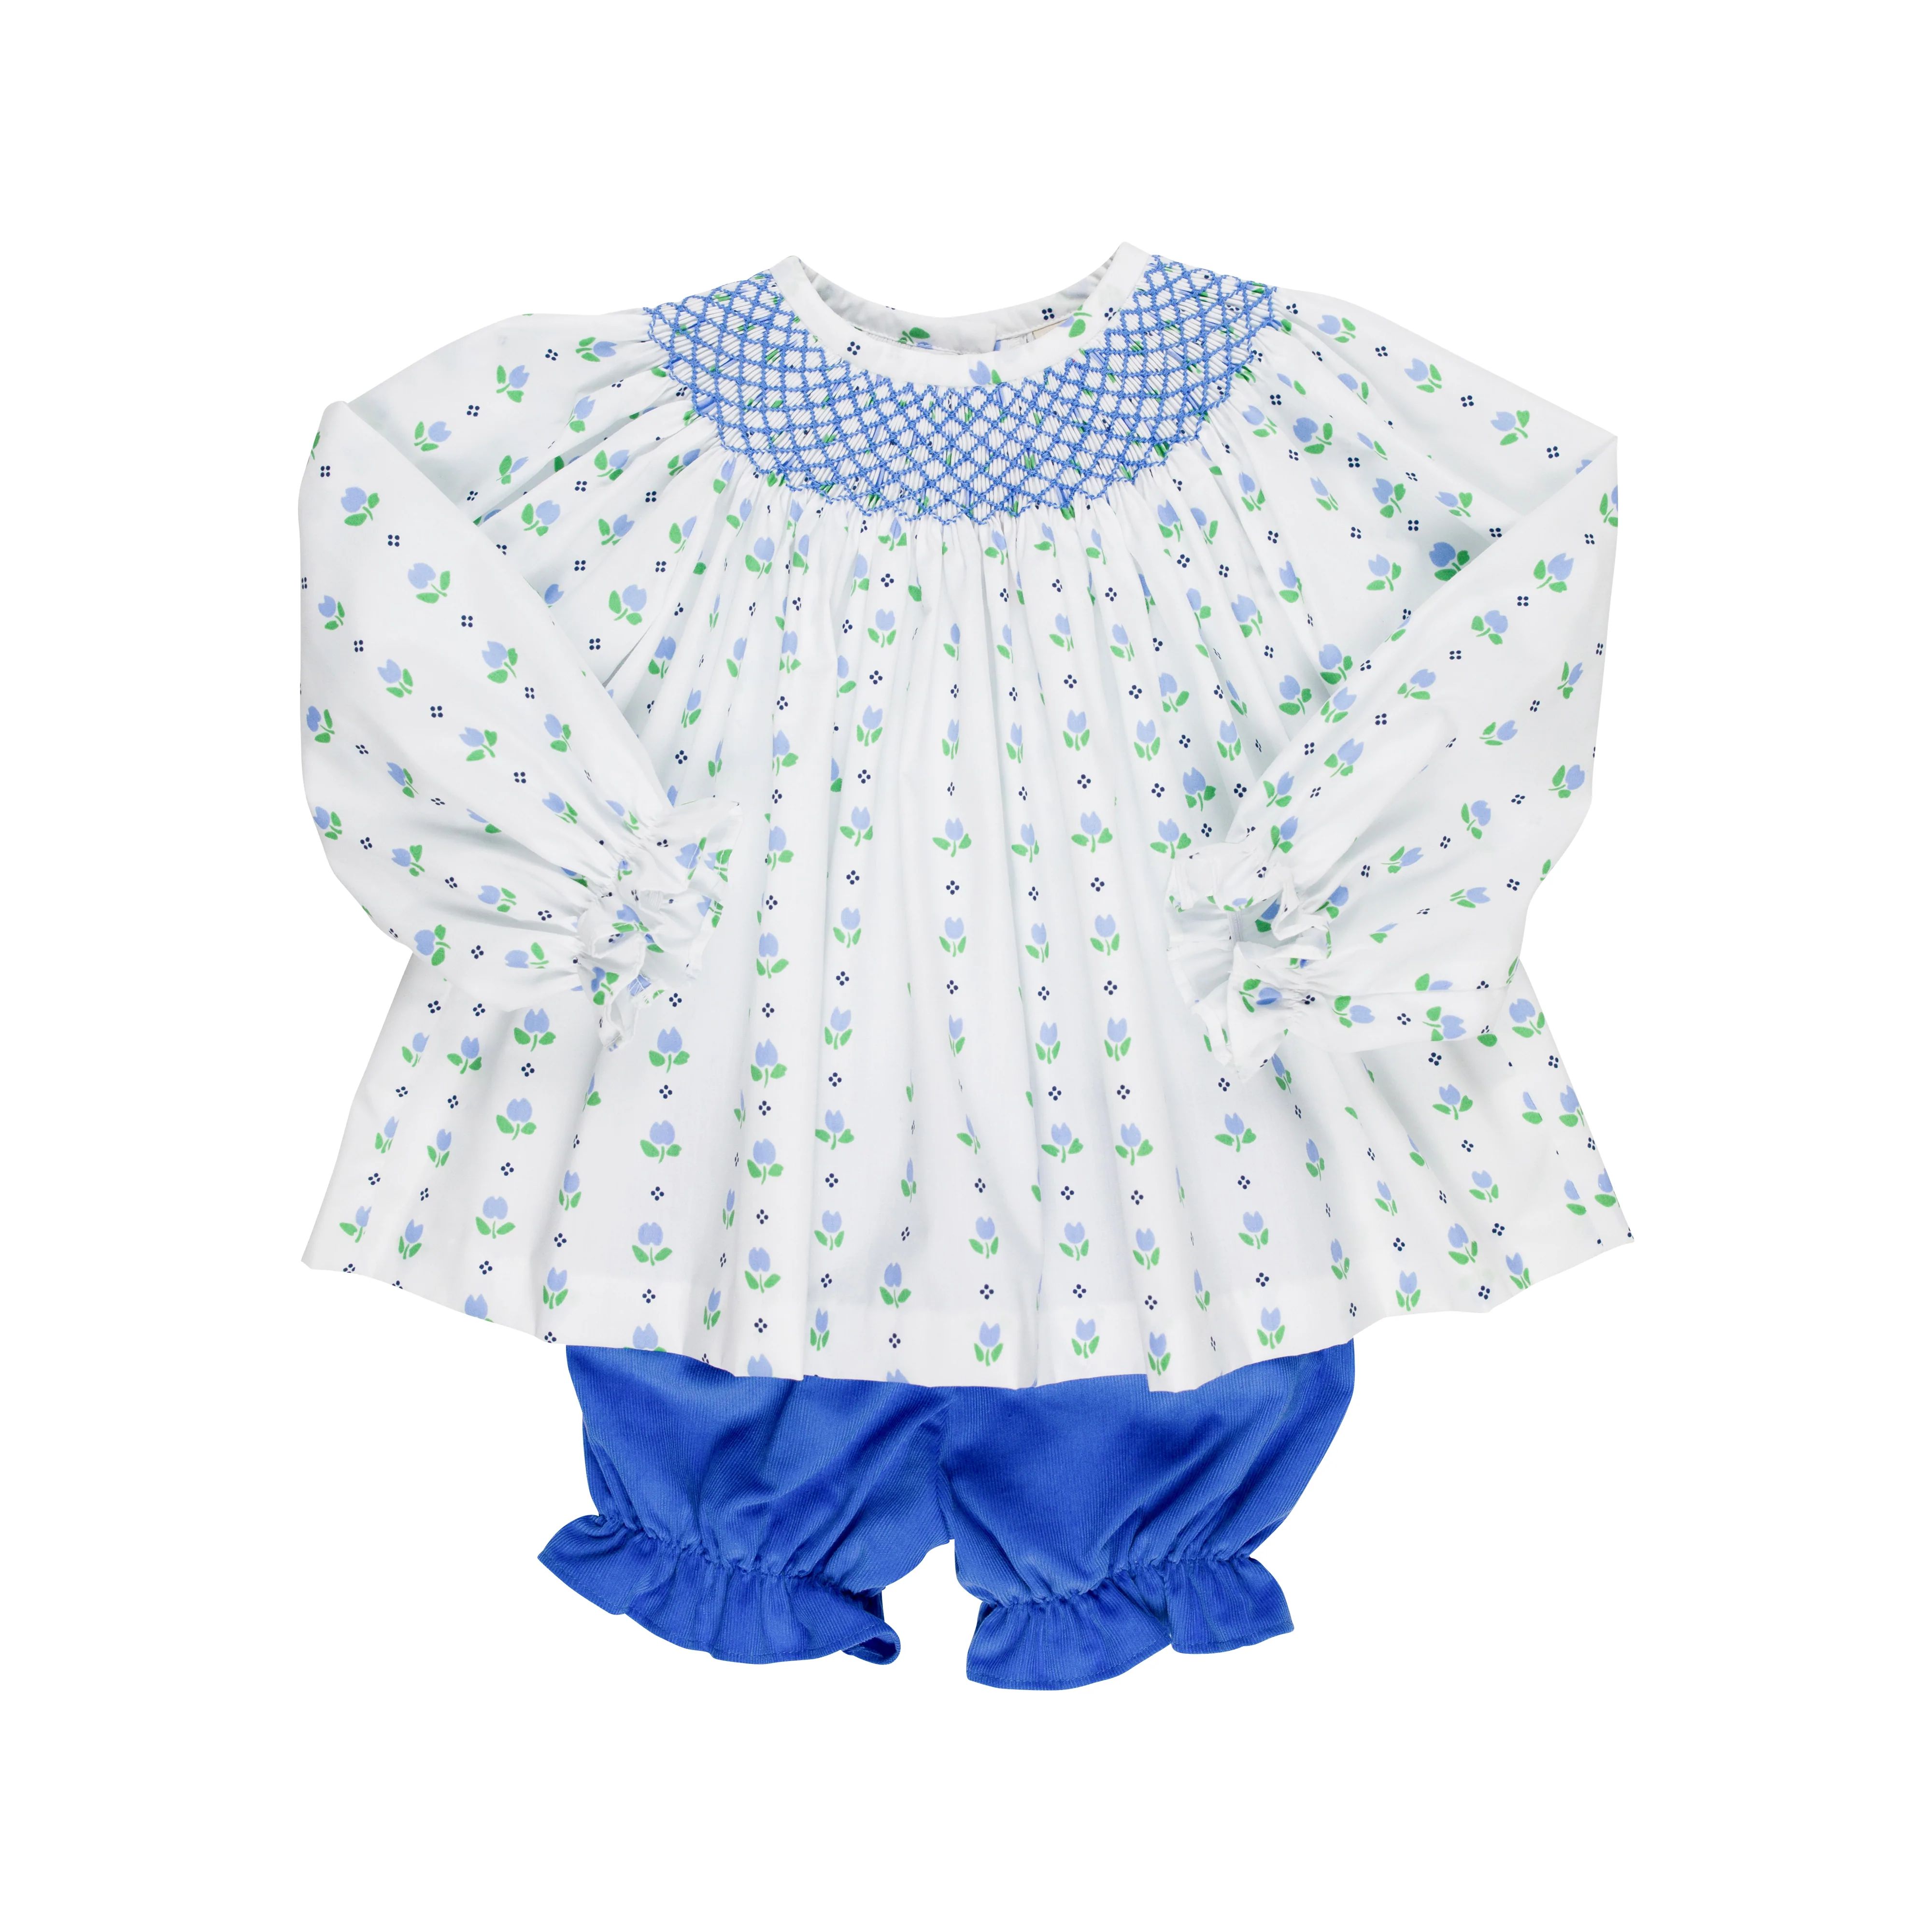 Bell House Bloomer Set - Georgetown Tulip with Barbados Blue Corduroy | The Beaufort Bonnet Company